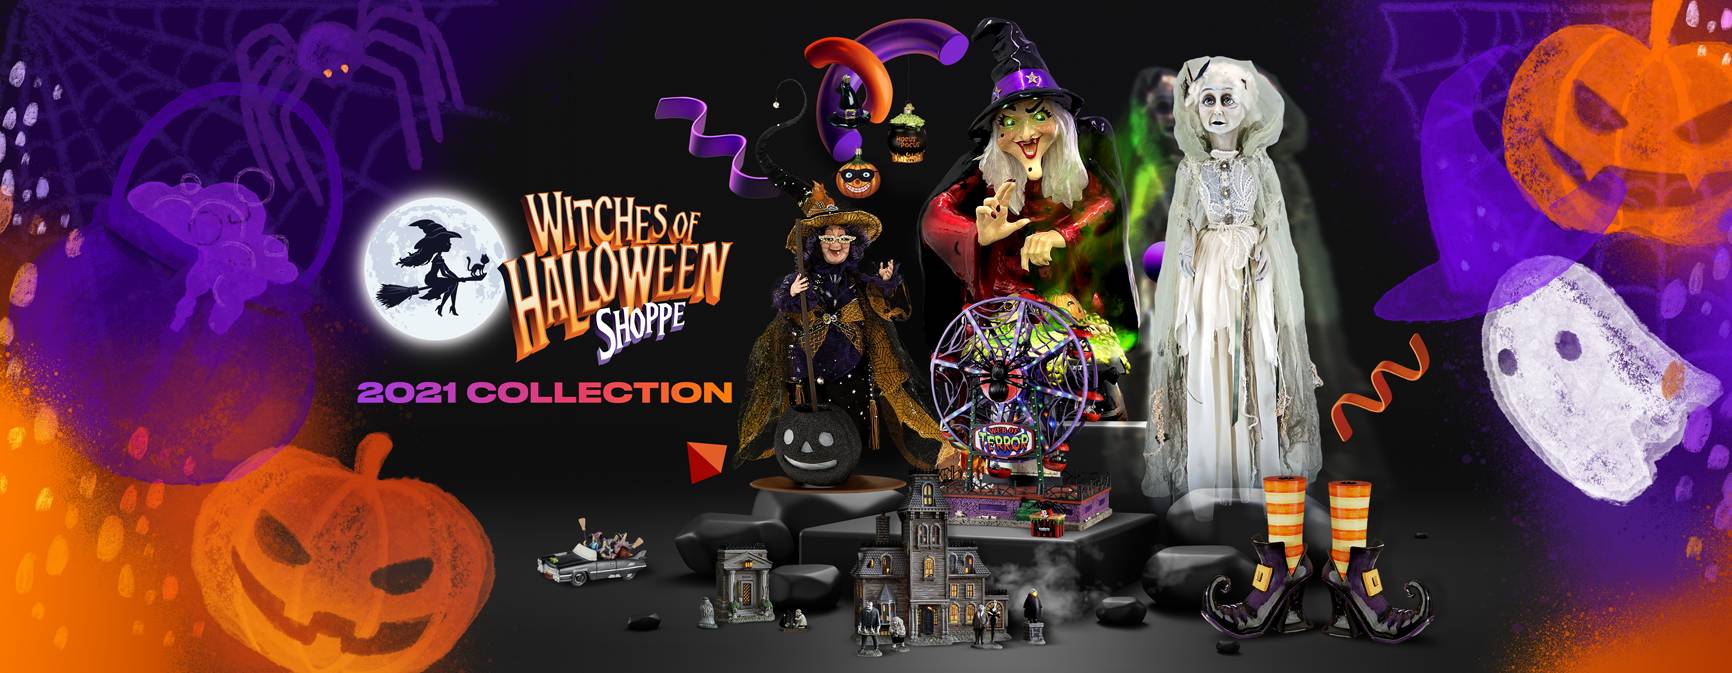 Witches of Halloween 2021 Collection